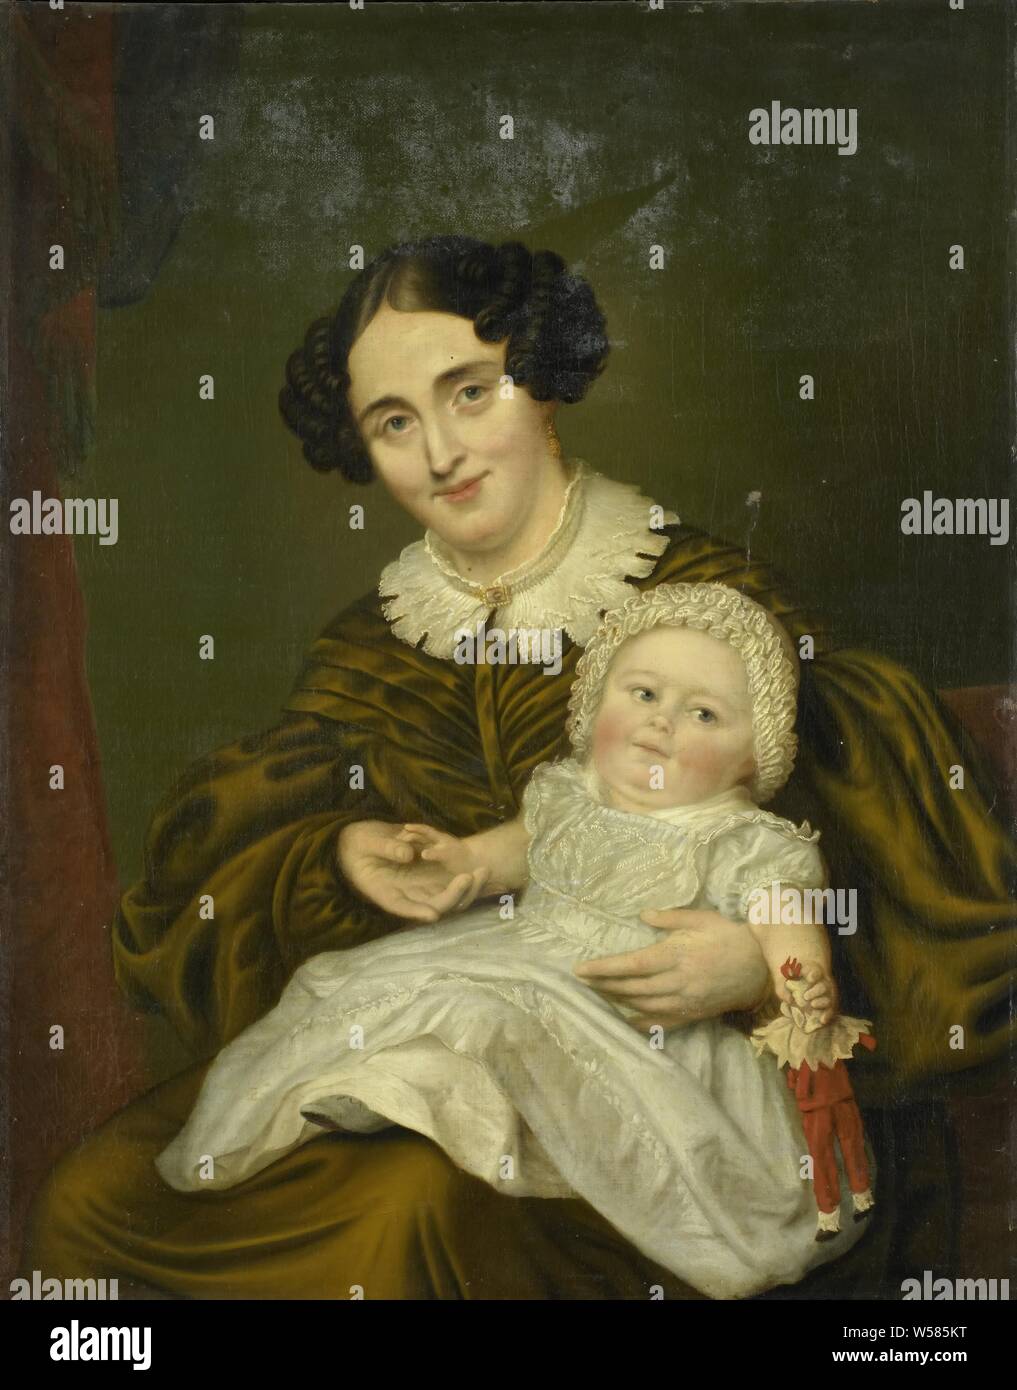 Mrs. Carp and her young Son, Portrait of Mrs. Carp and her son. Sitting with the child holding a doll on his lap., Louis Moritz, 1830 - 1850, canvas, oil paint (paint), h 102 cm × w 80.6 cm × t 3.7 cm d 11.2 cm Stock Photo